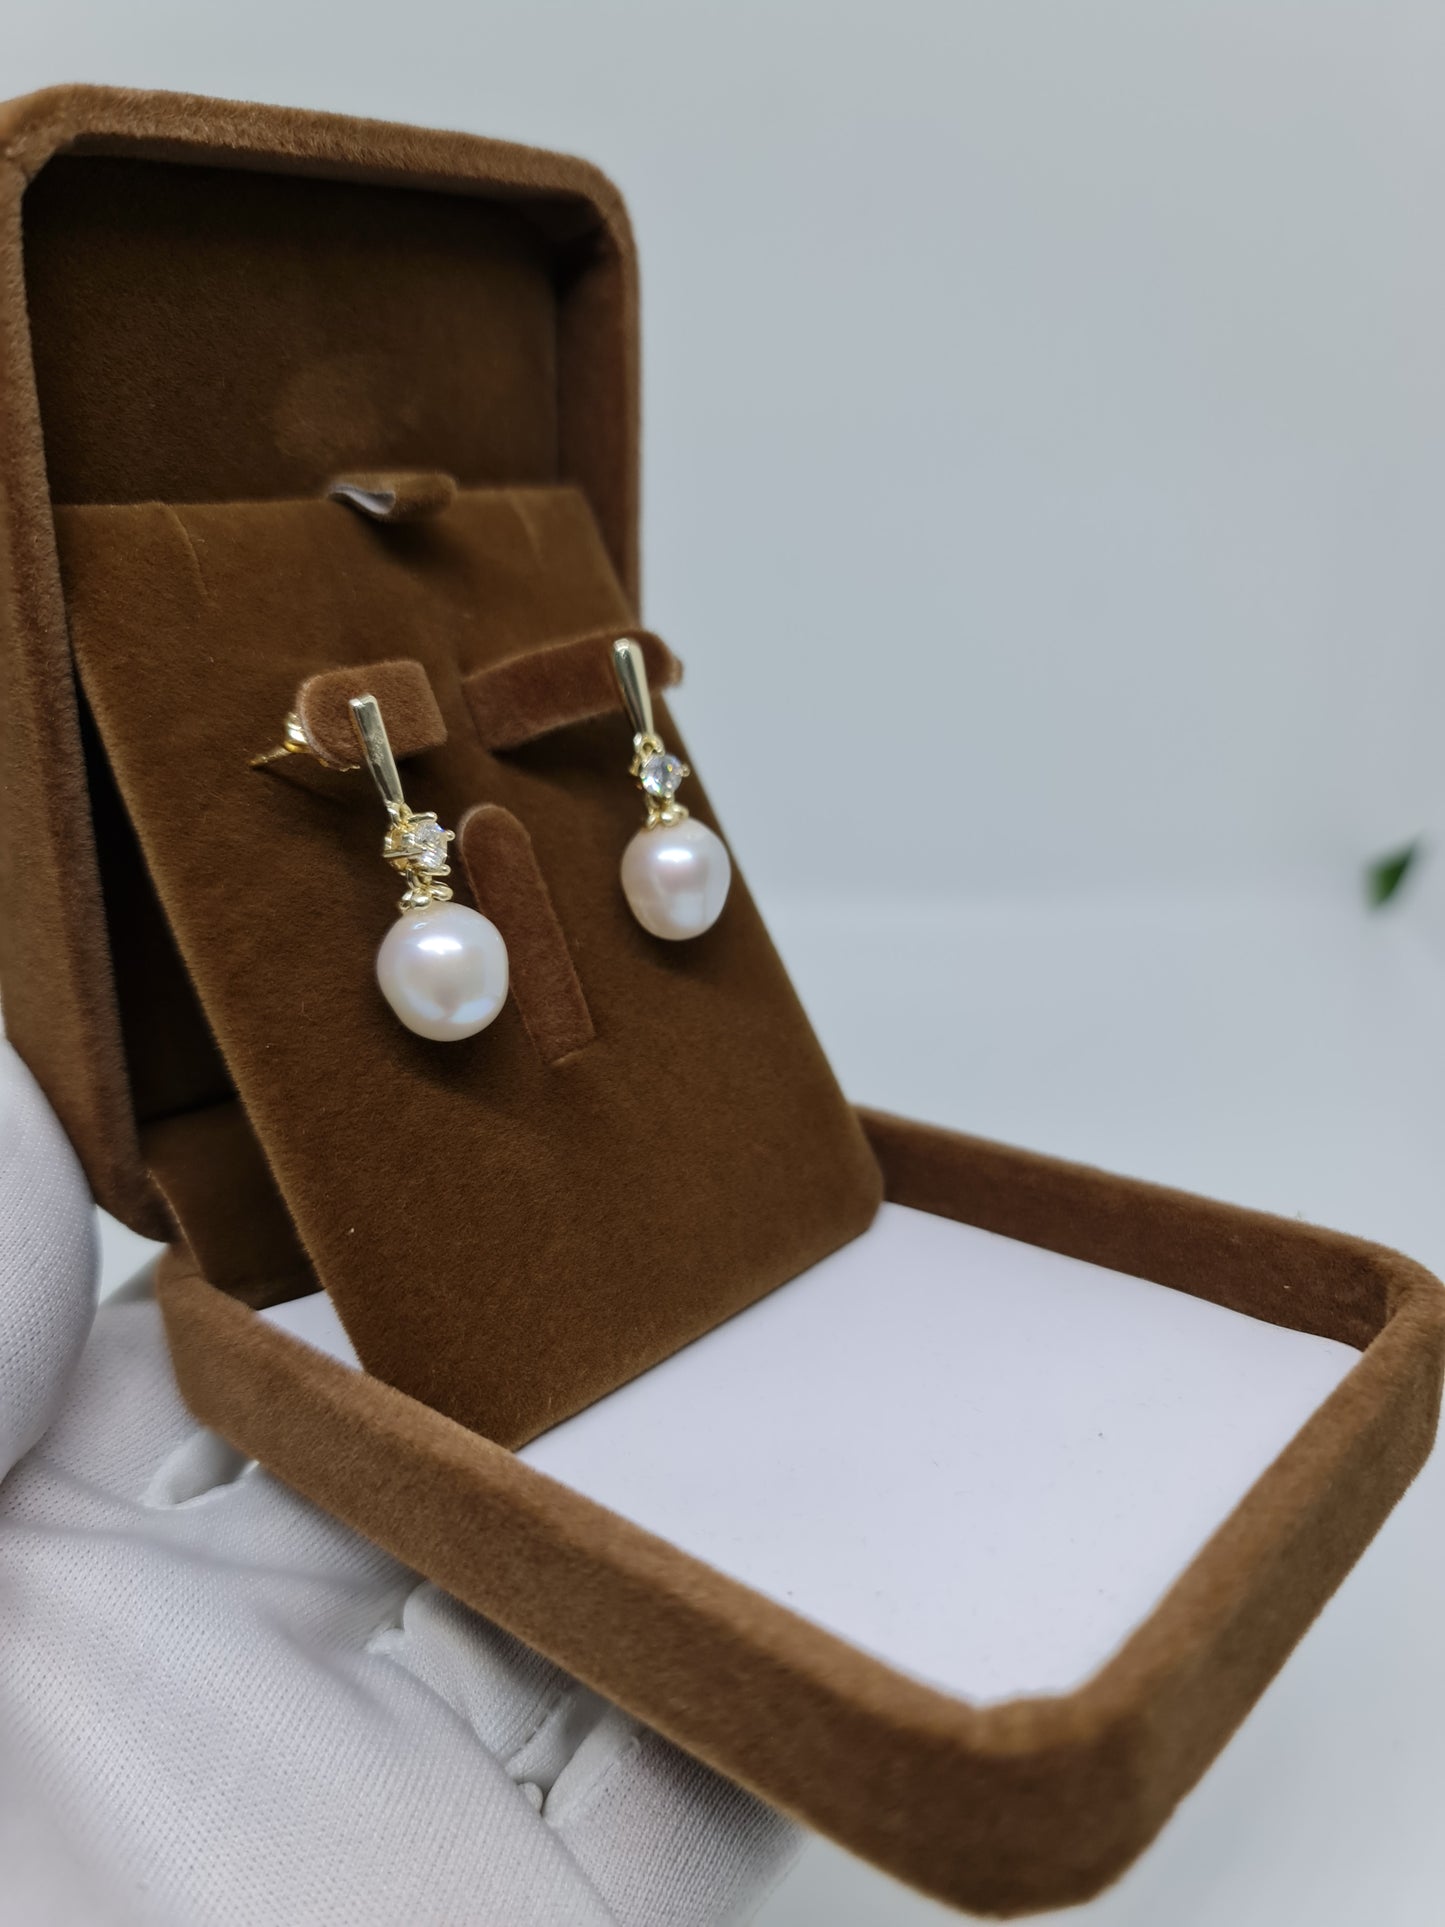 11mm Creamy White South Sea Pearls Earrings Plated Settings